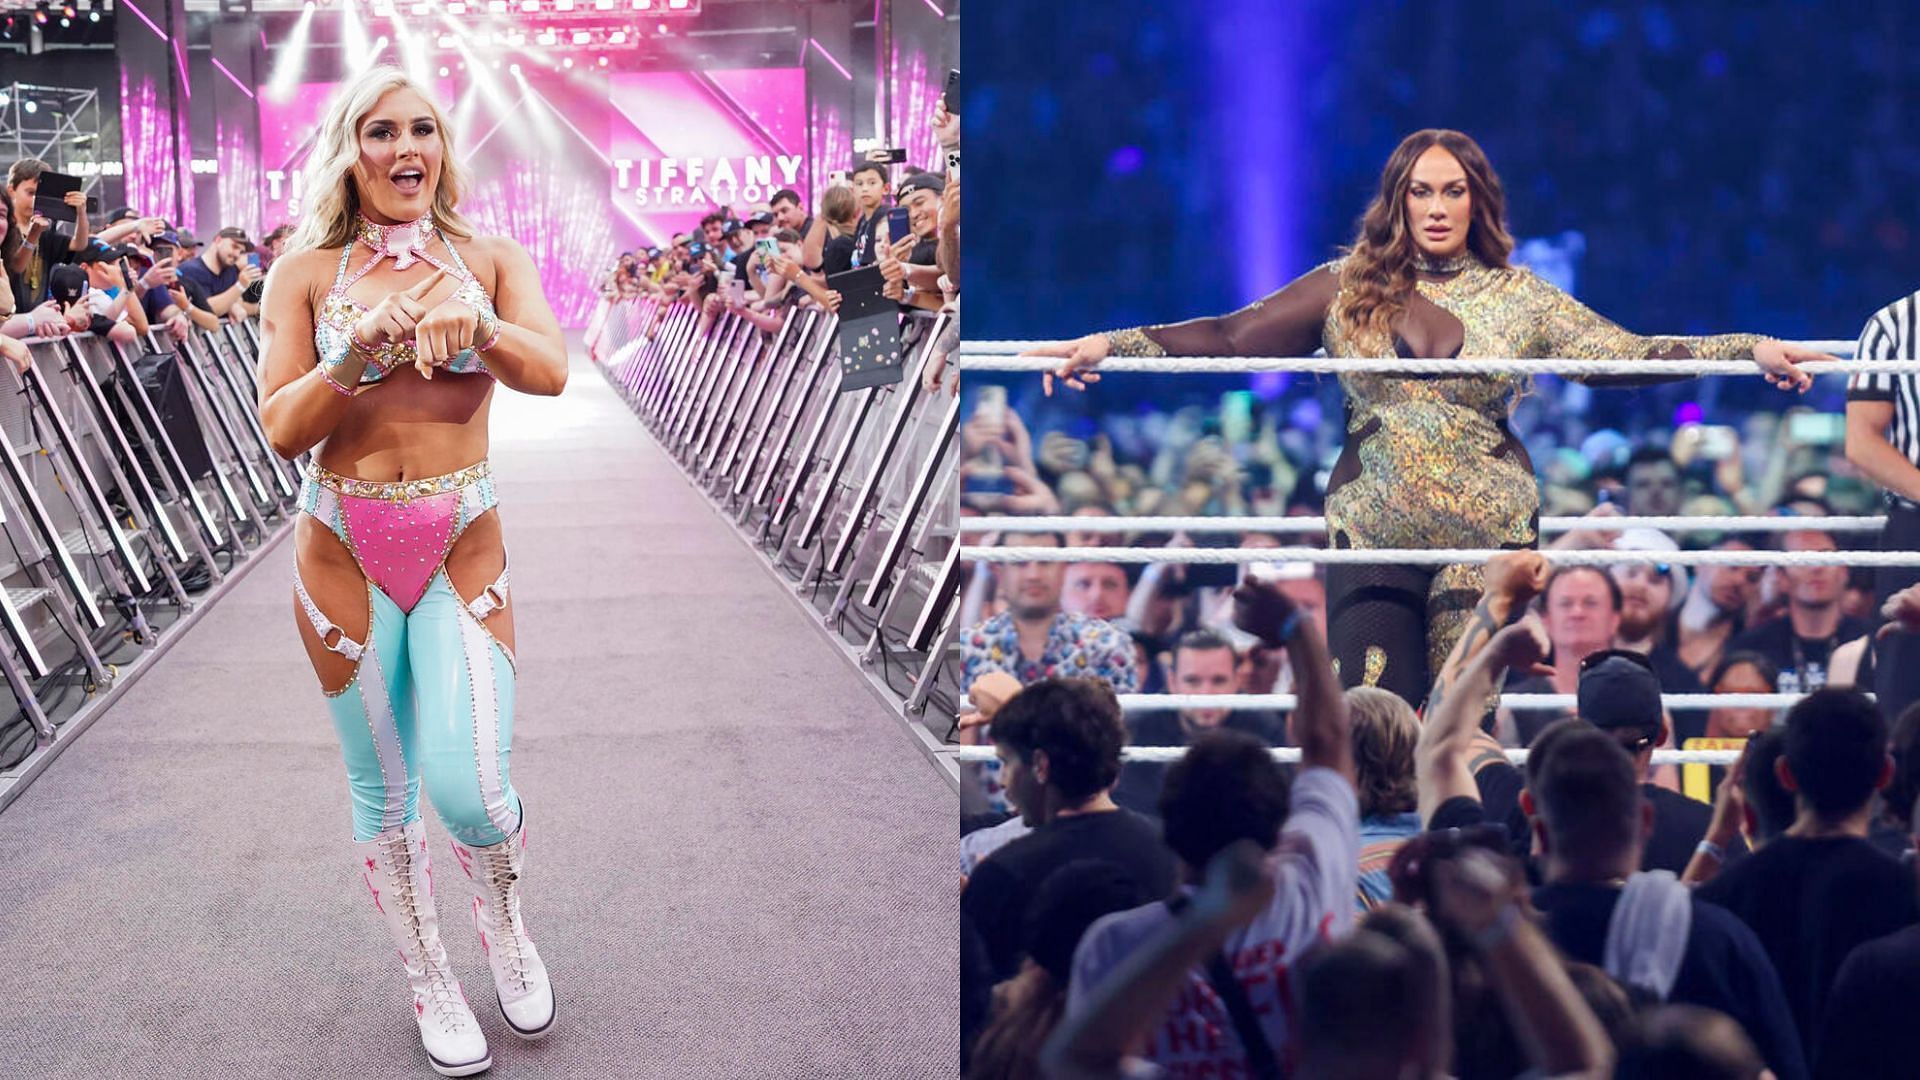 Tiffany Stratton and Nia Jax competed at the Elimination Chamber: Perth PLE